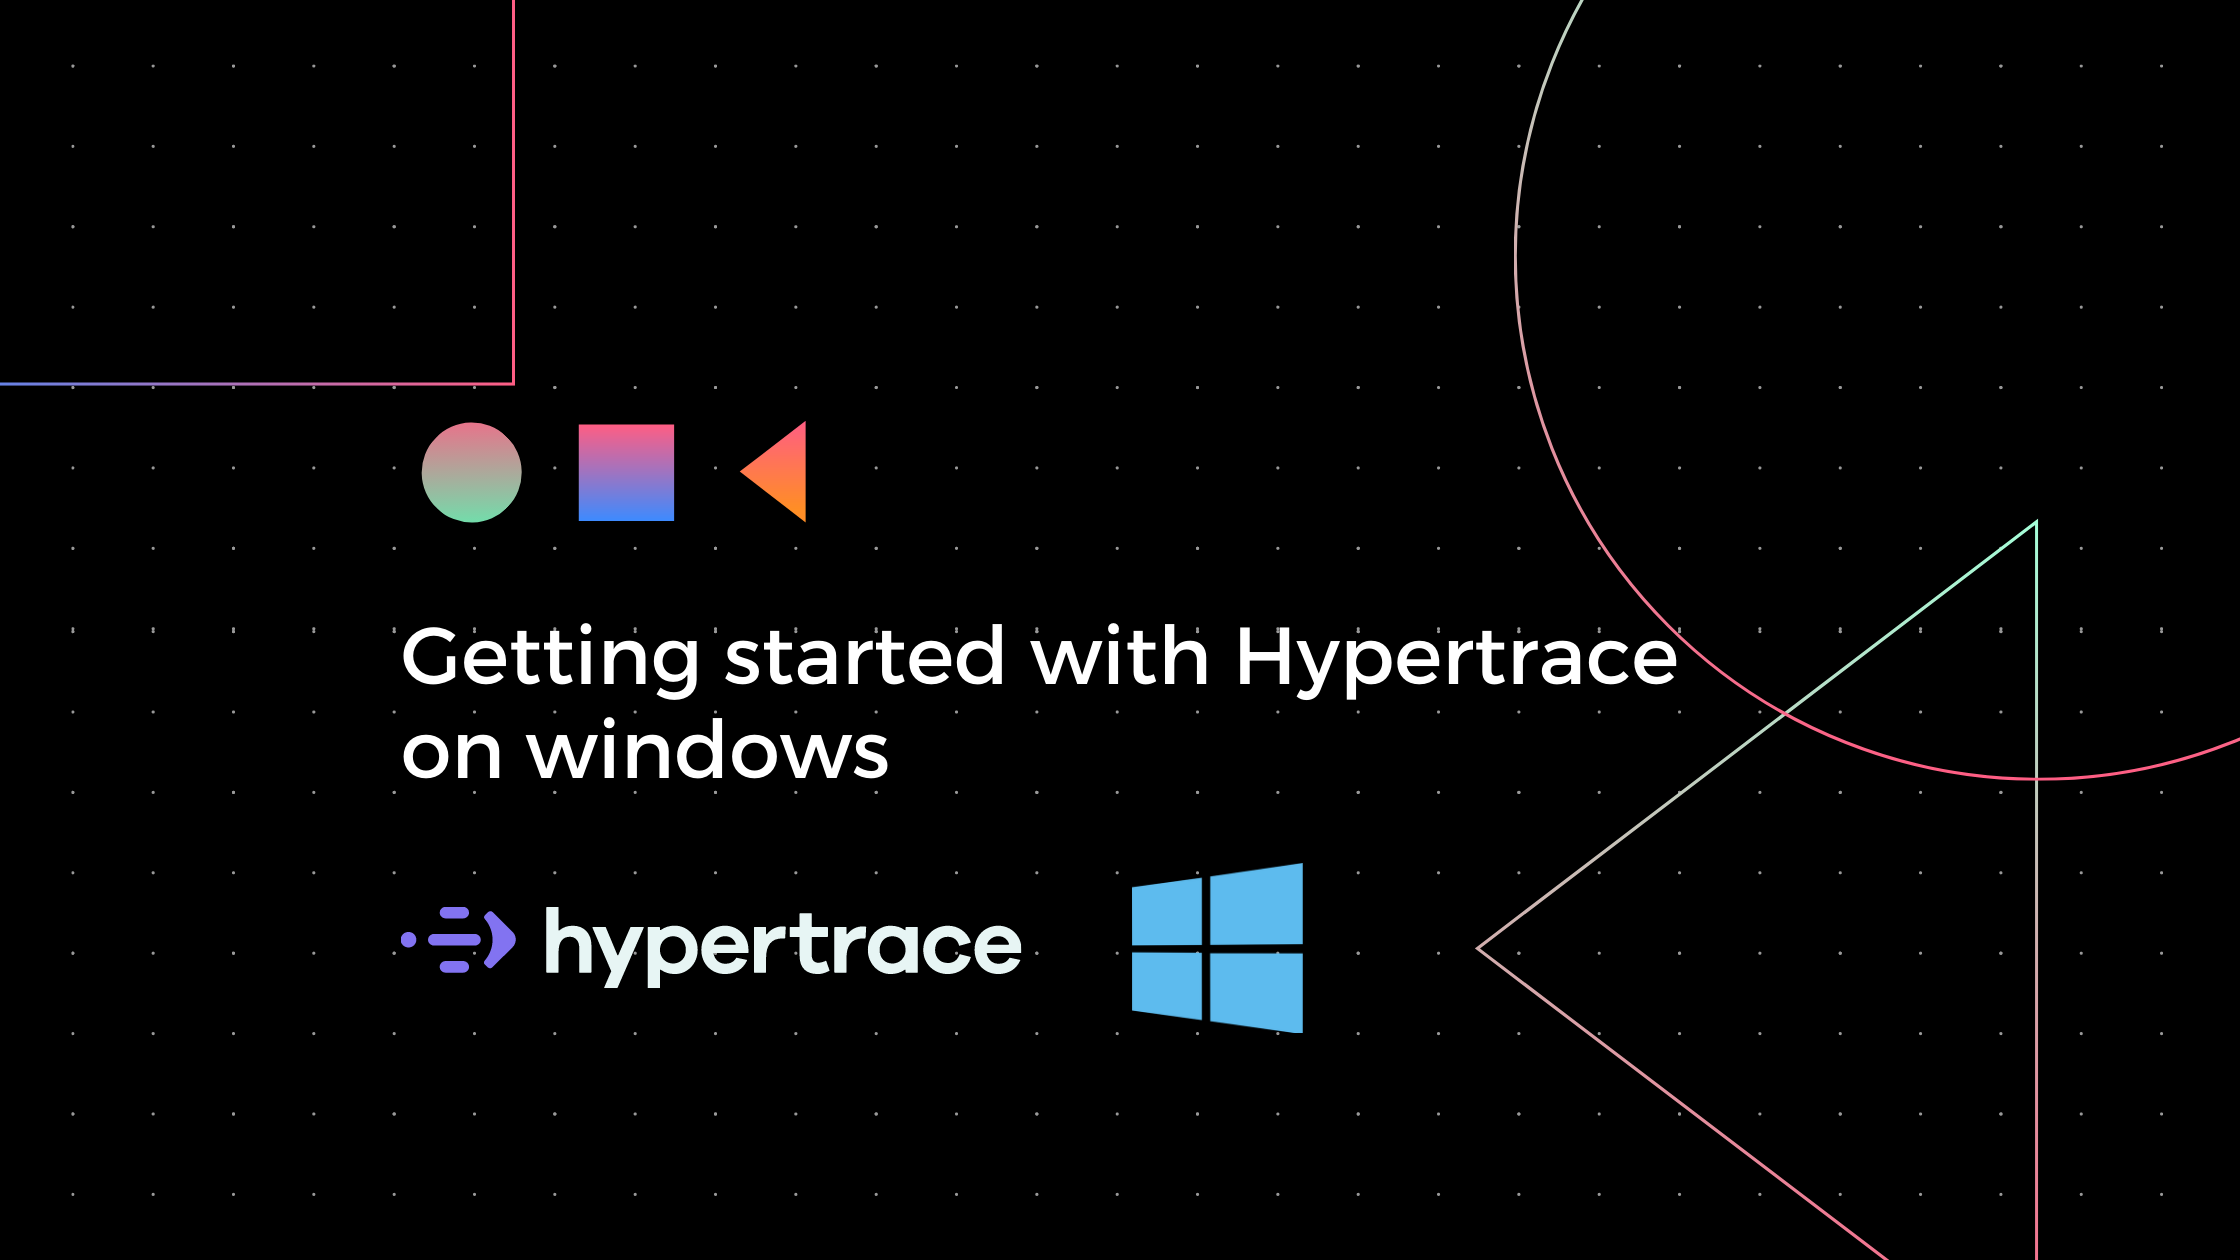 Getting started with Hypertrace on Windows